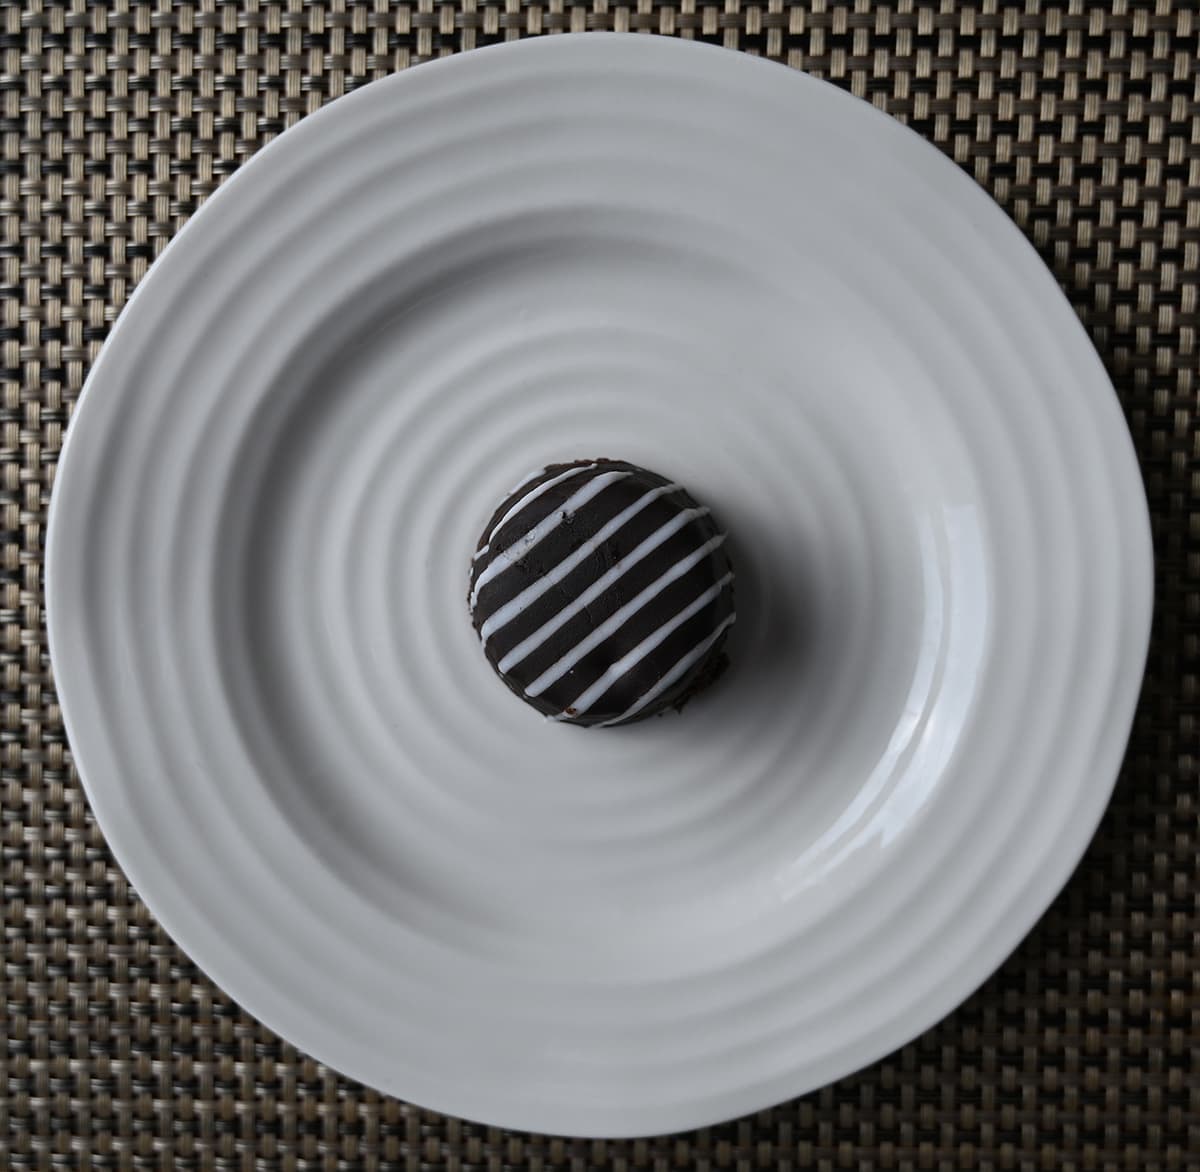 Top down image of one tuxedo cake bite served on a white plate so you can see the icing on top.